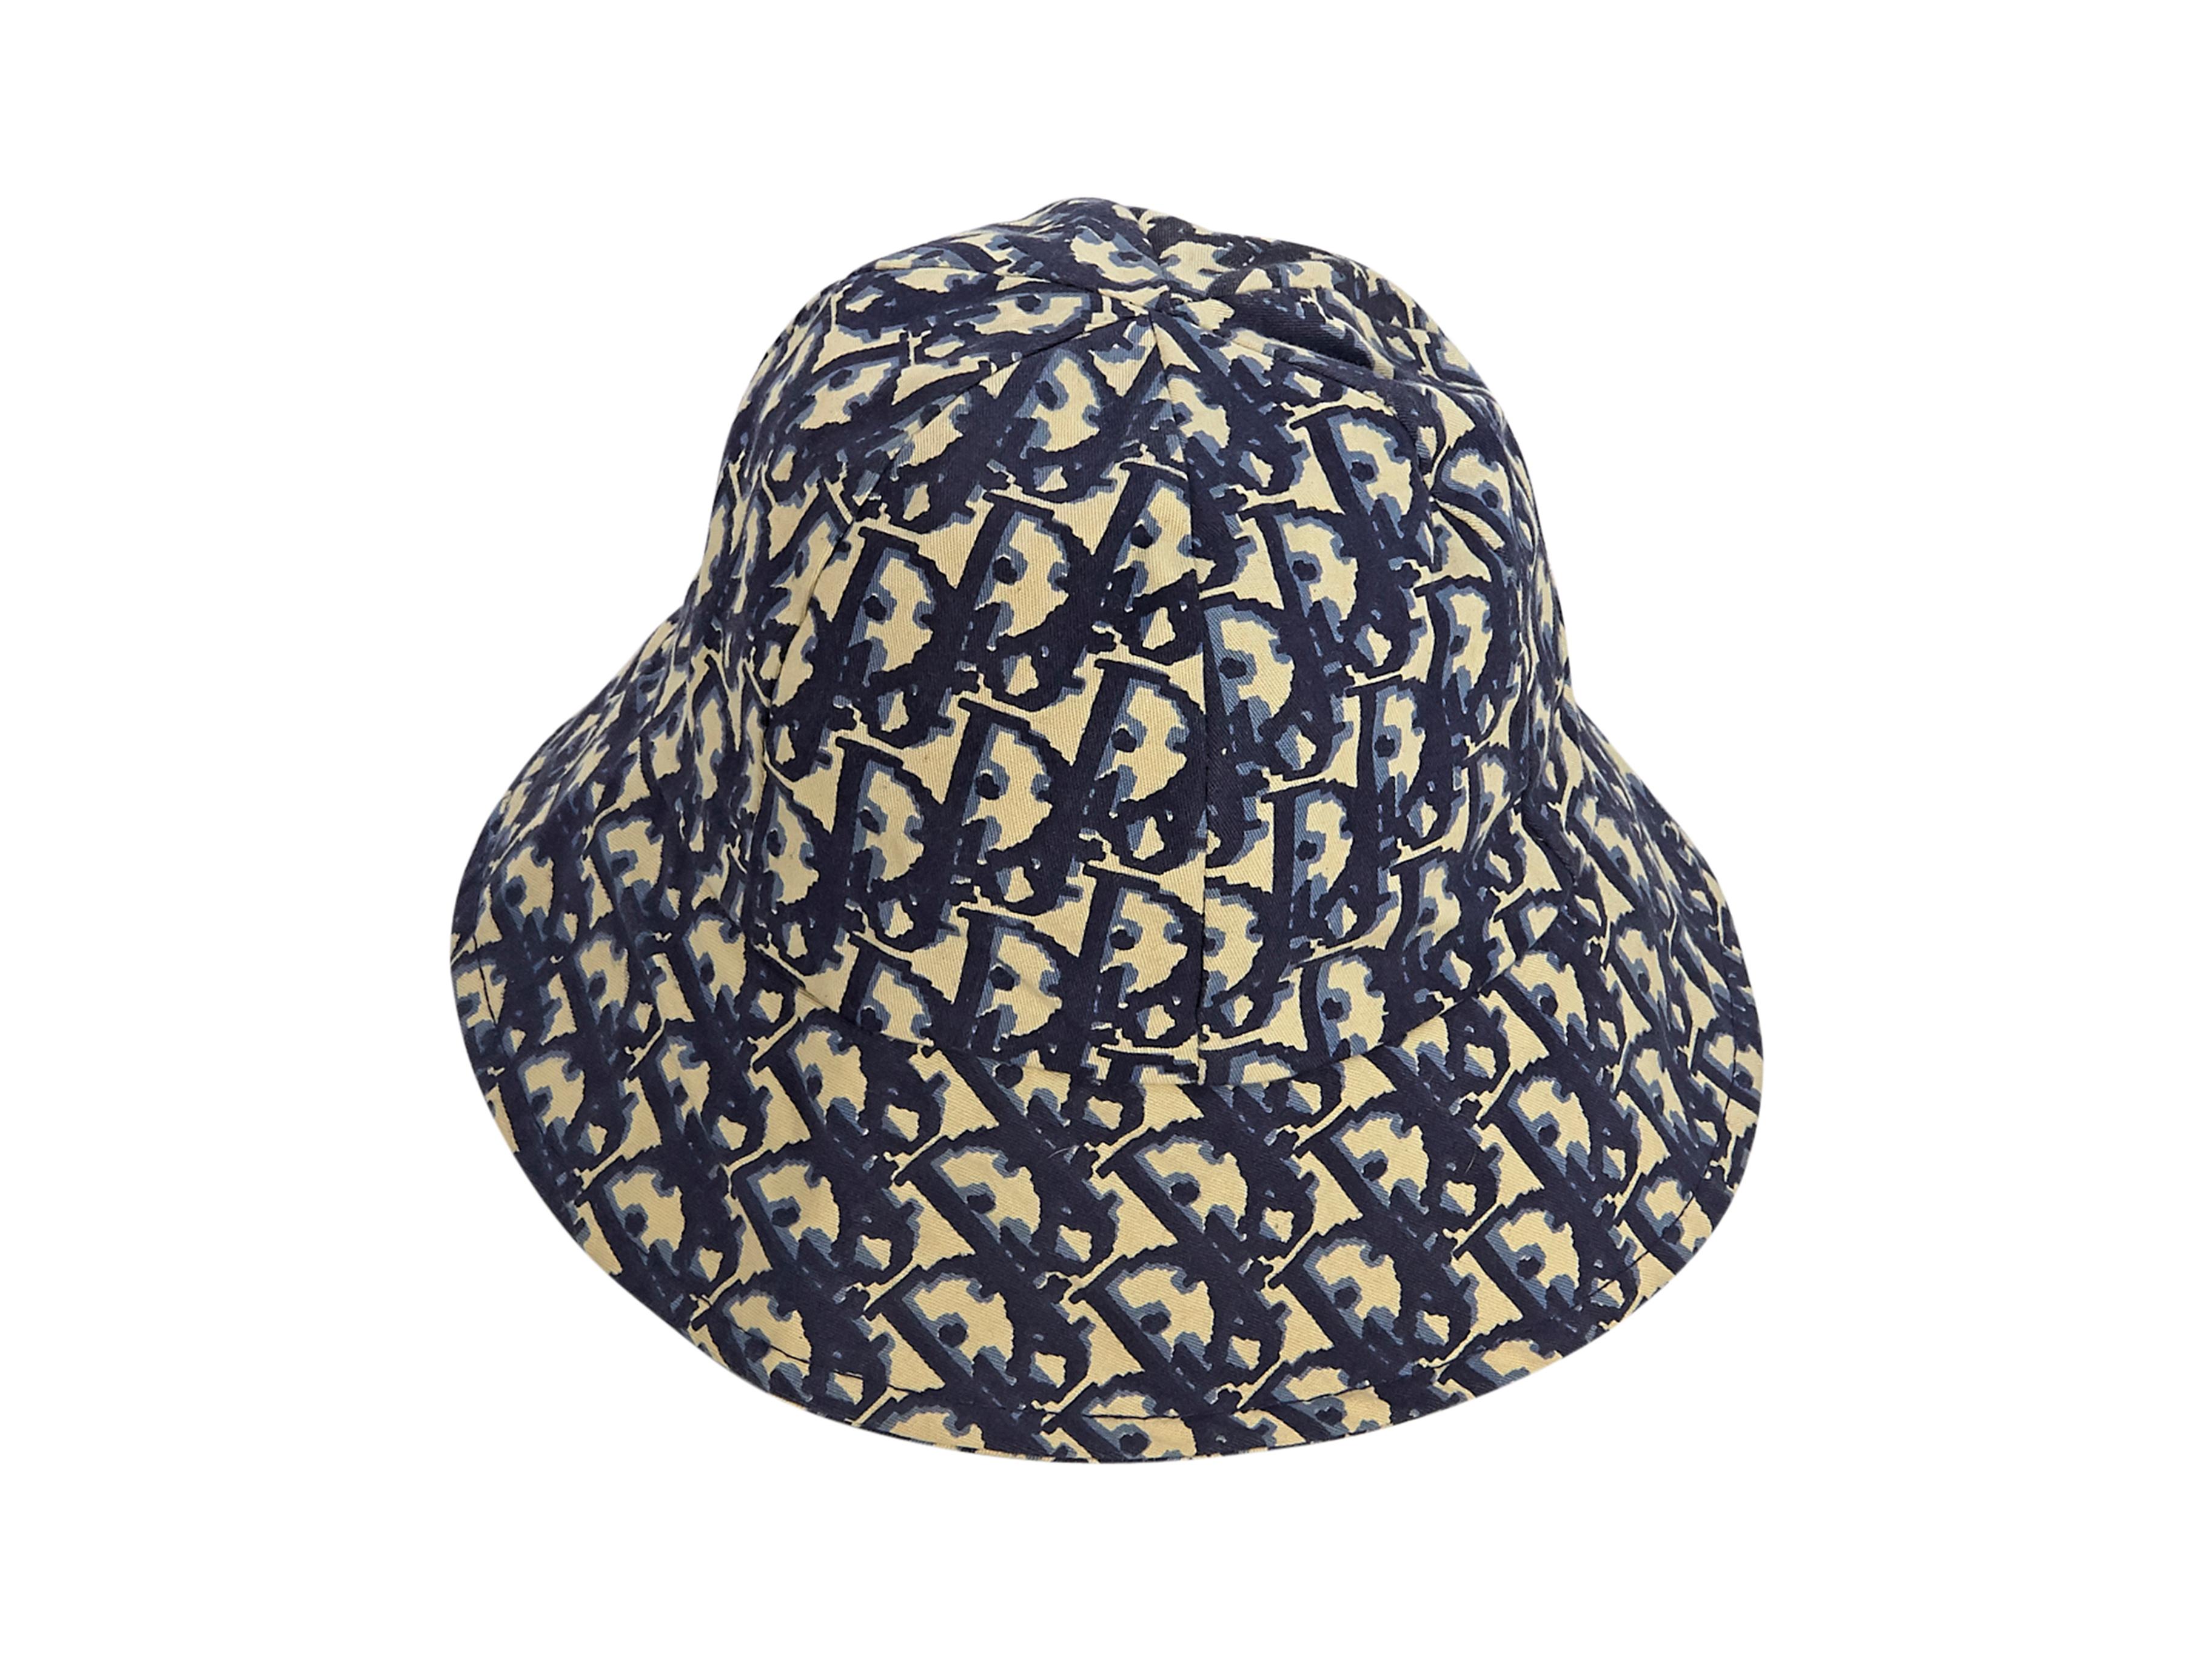 Product details:  Blue and cream monogram bucket hat by Christian Dior.  Water repellent design.  Lined interior.  25.25